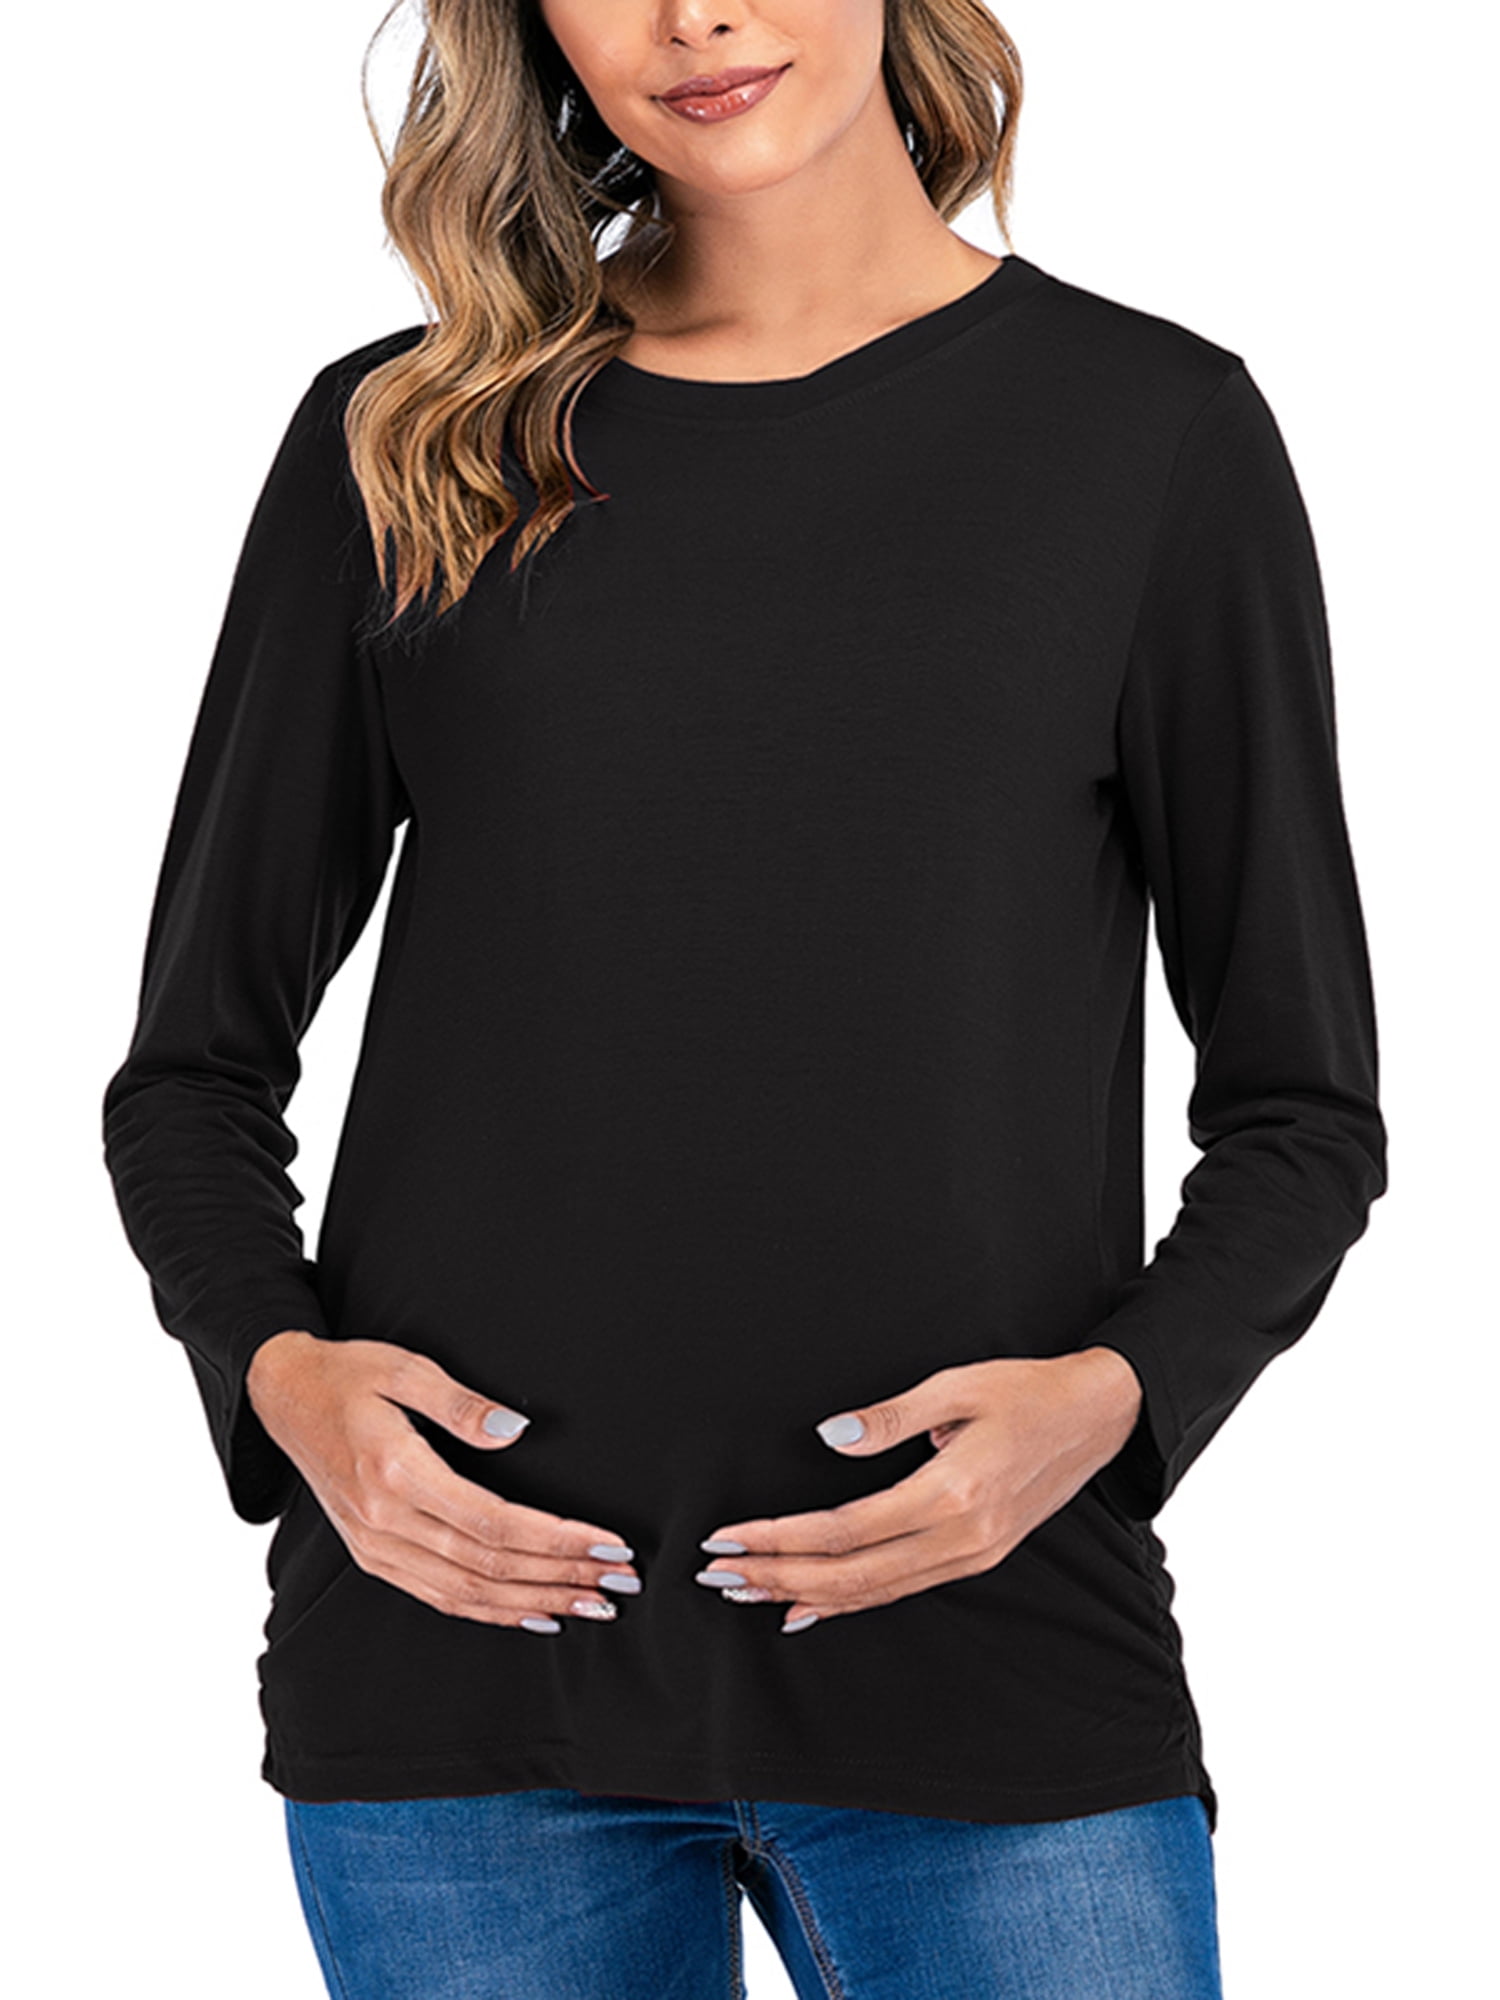 Wodstyle Women S Pregnant Maternity Long Sleeve Tee Casual Plain Blouse Loose T Shirts